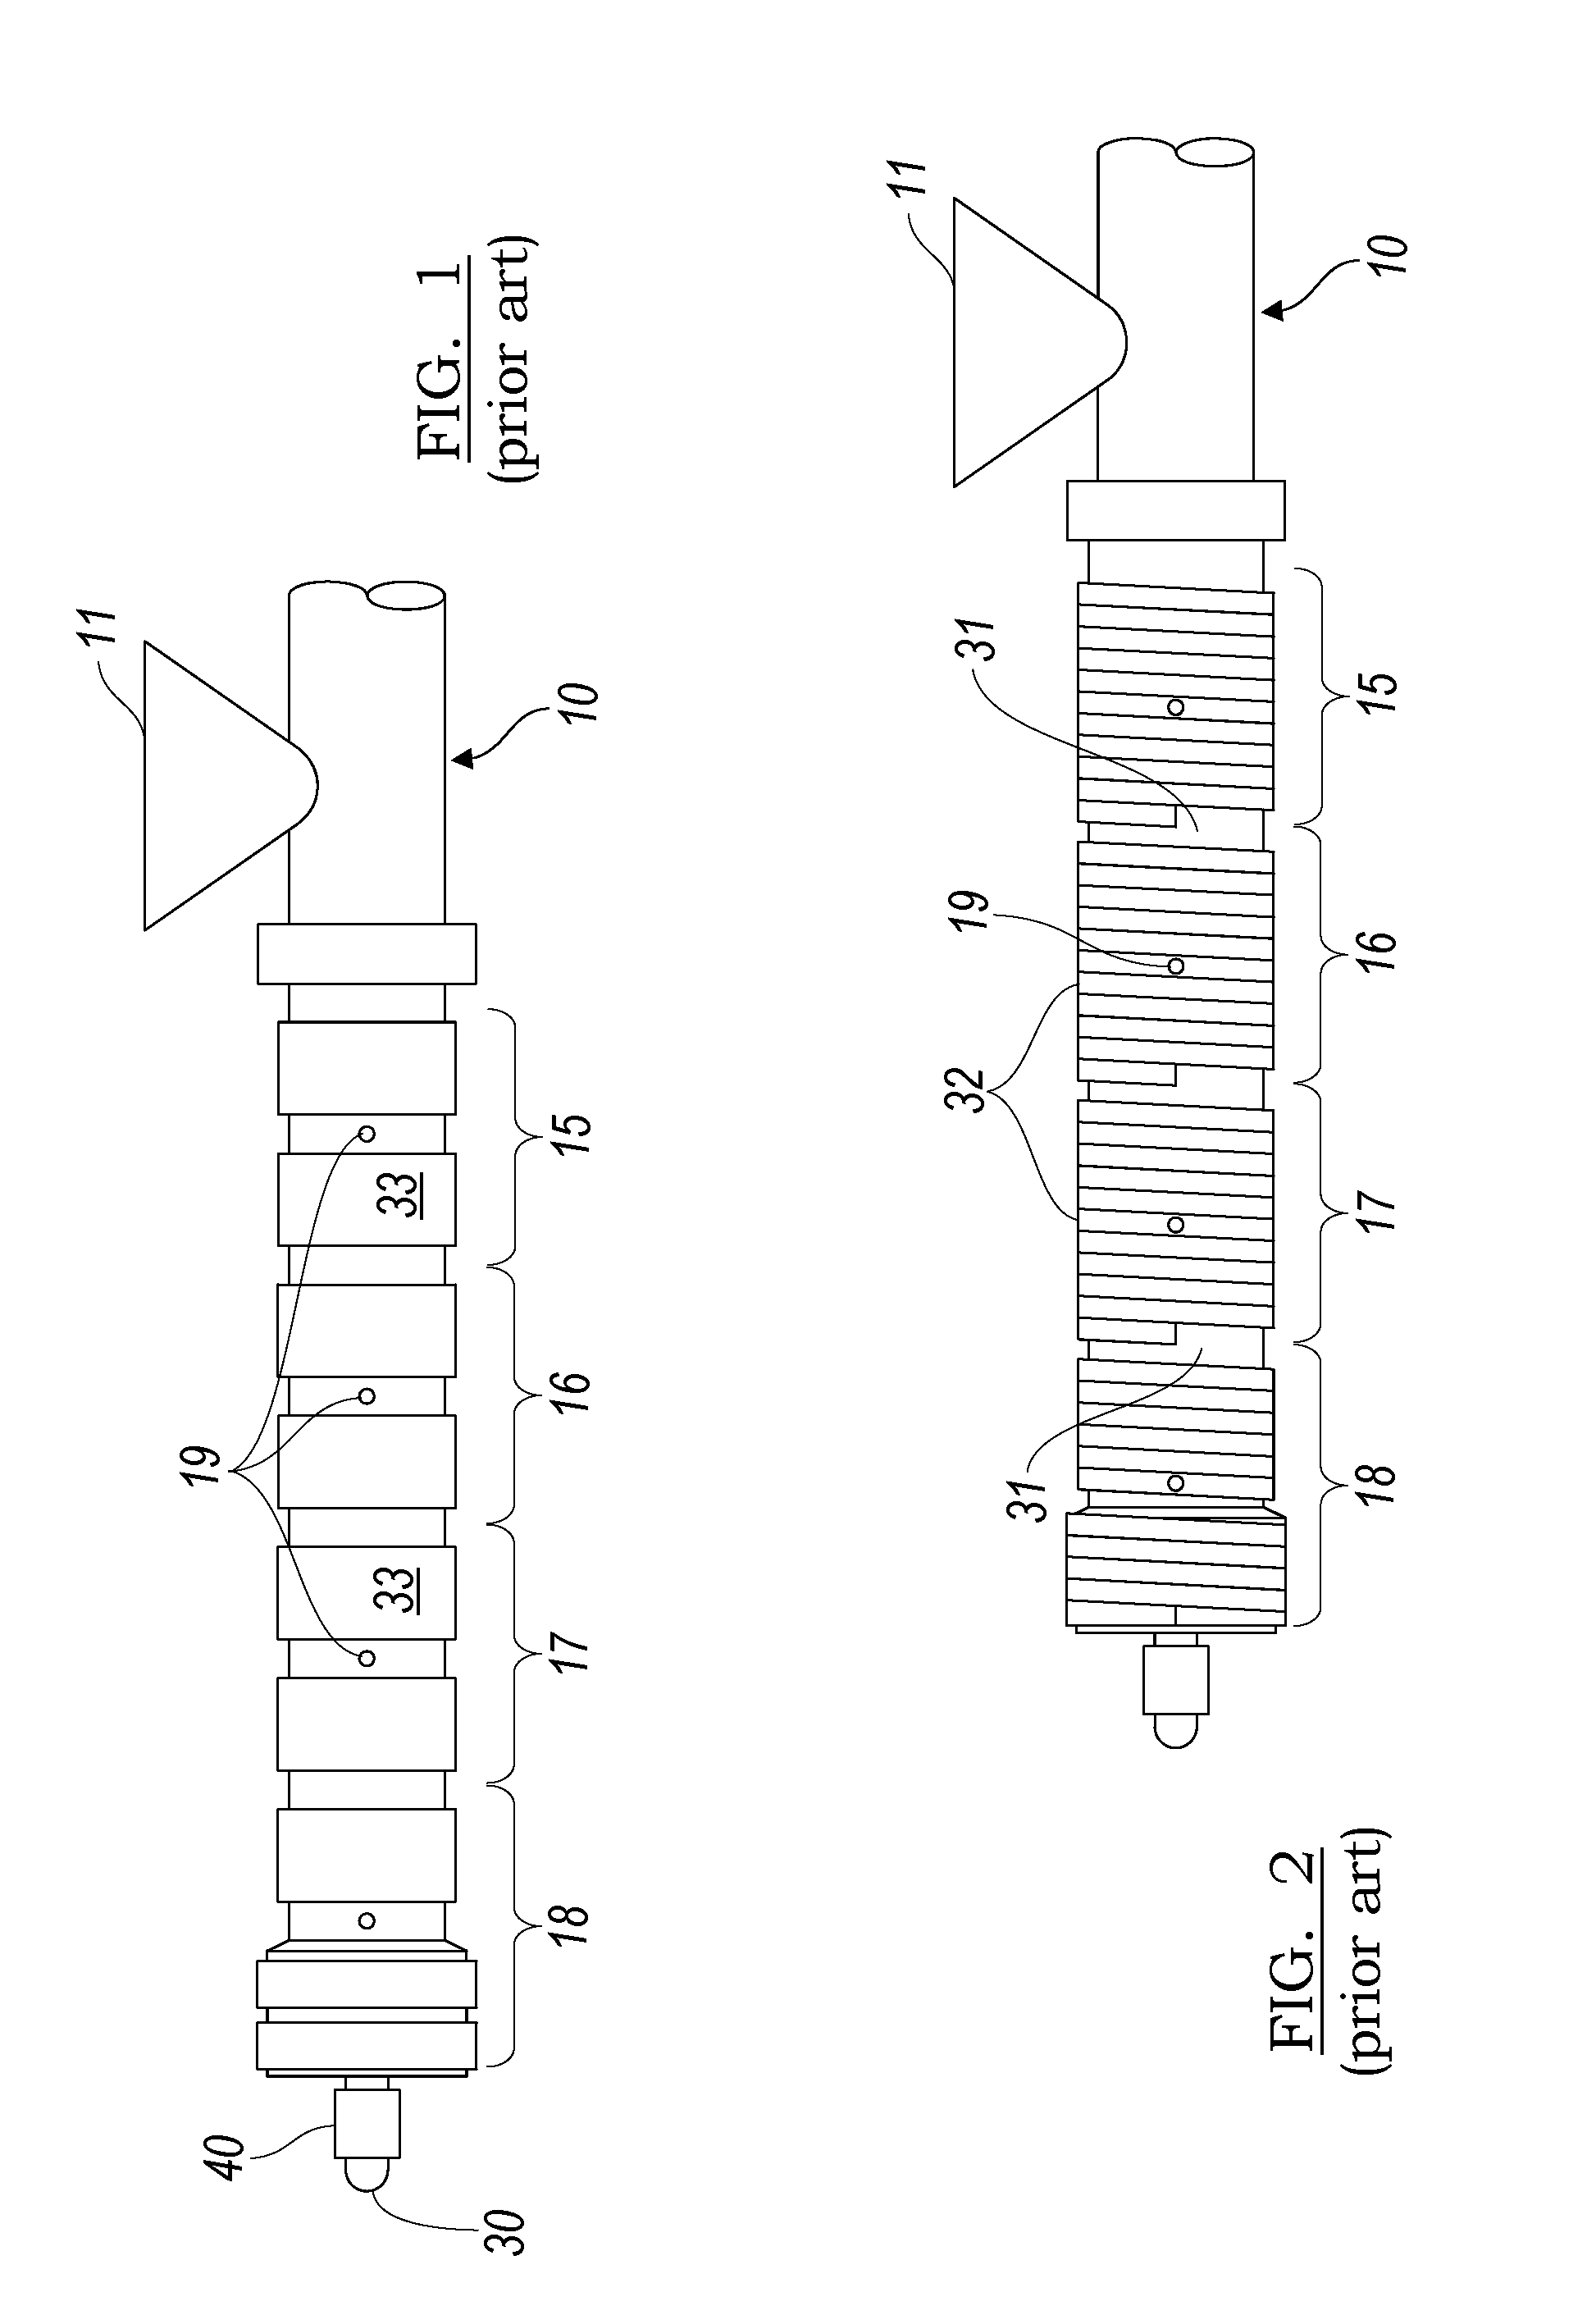 Combined Screw Design and Heating Mechanism for Low Shear Resins